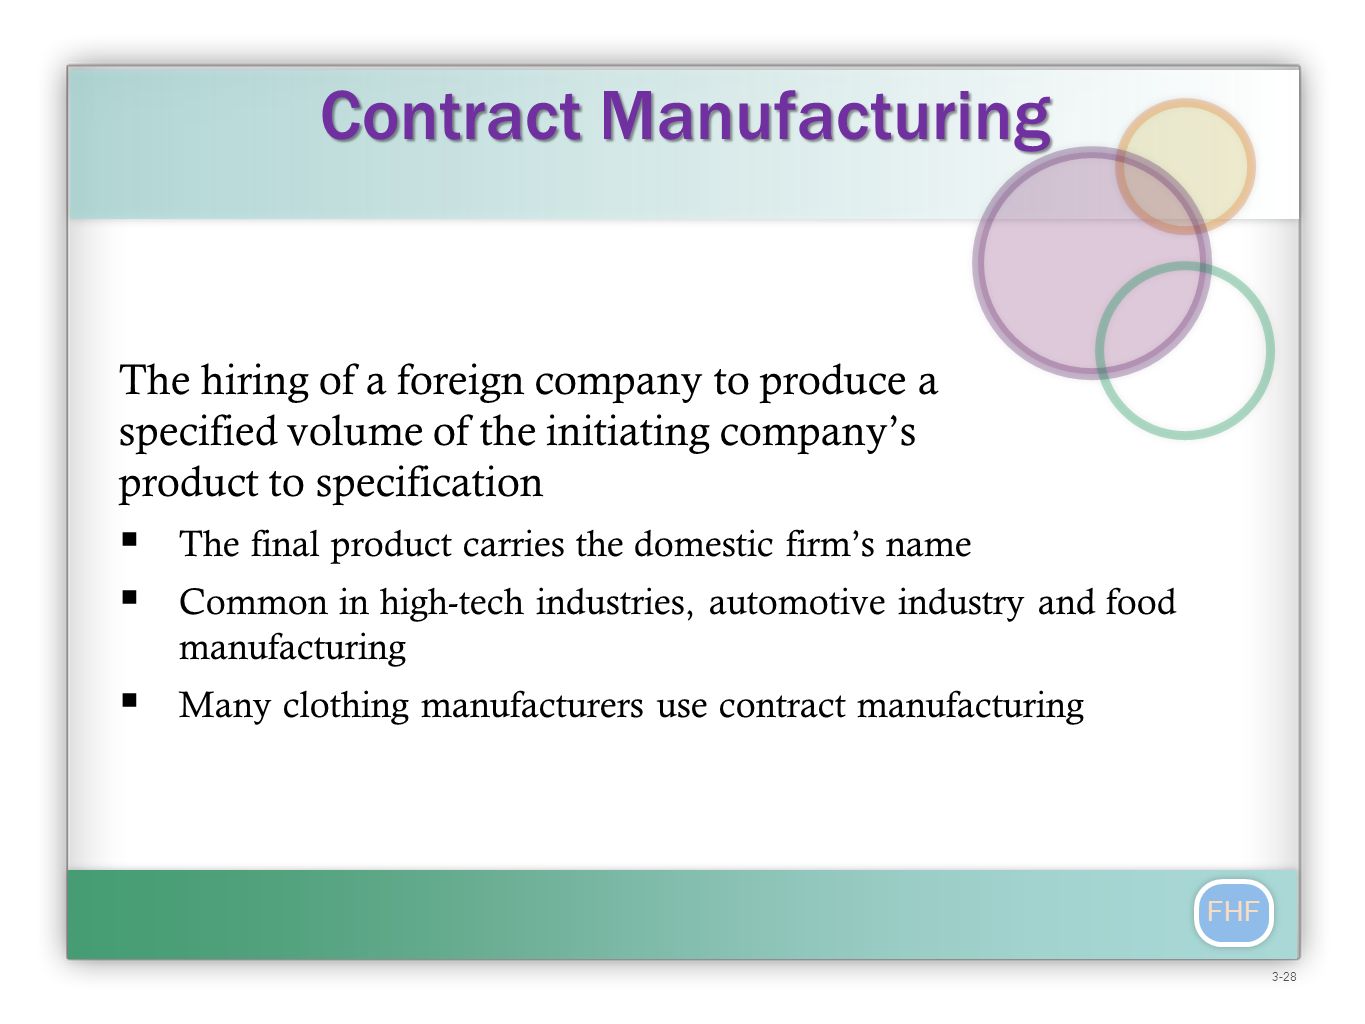 FHF The hiring of a foreign company to produce a specified volume of the initiating company’s product to specification  The final product carries the domestic firm’s name  Common in high-tech industries, automotive industry and food manufacturing  Many clothing manufacturers use contract manufacturing Contract Manufacturing 3-28